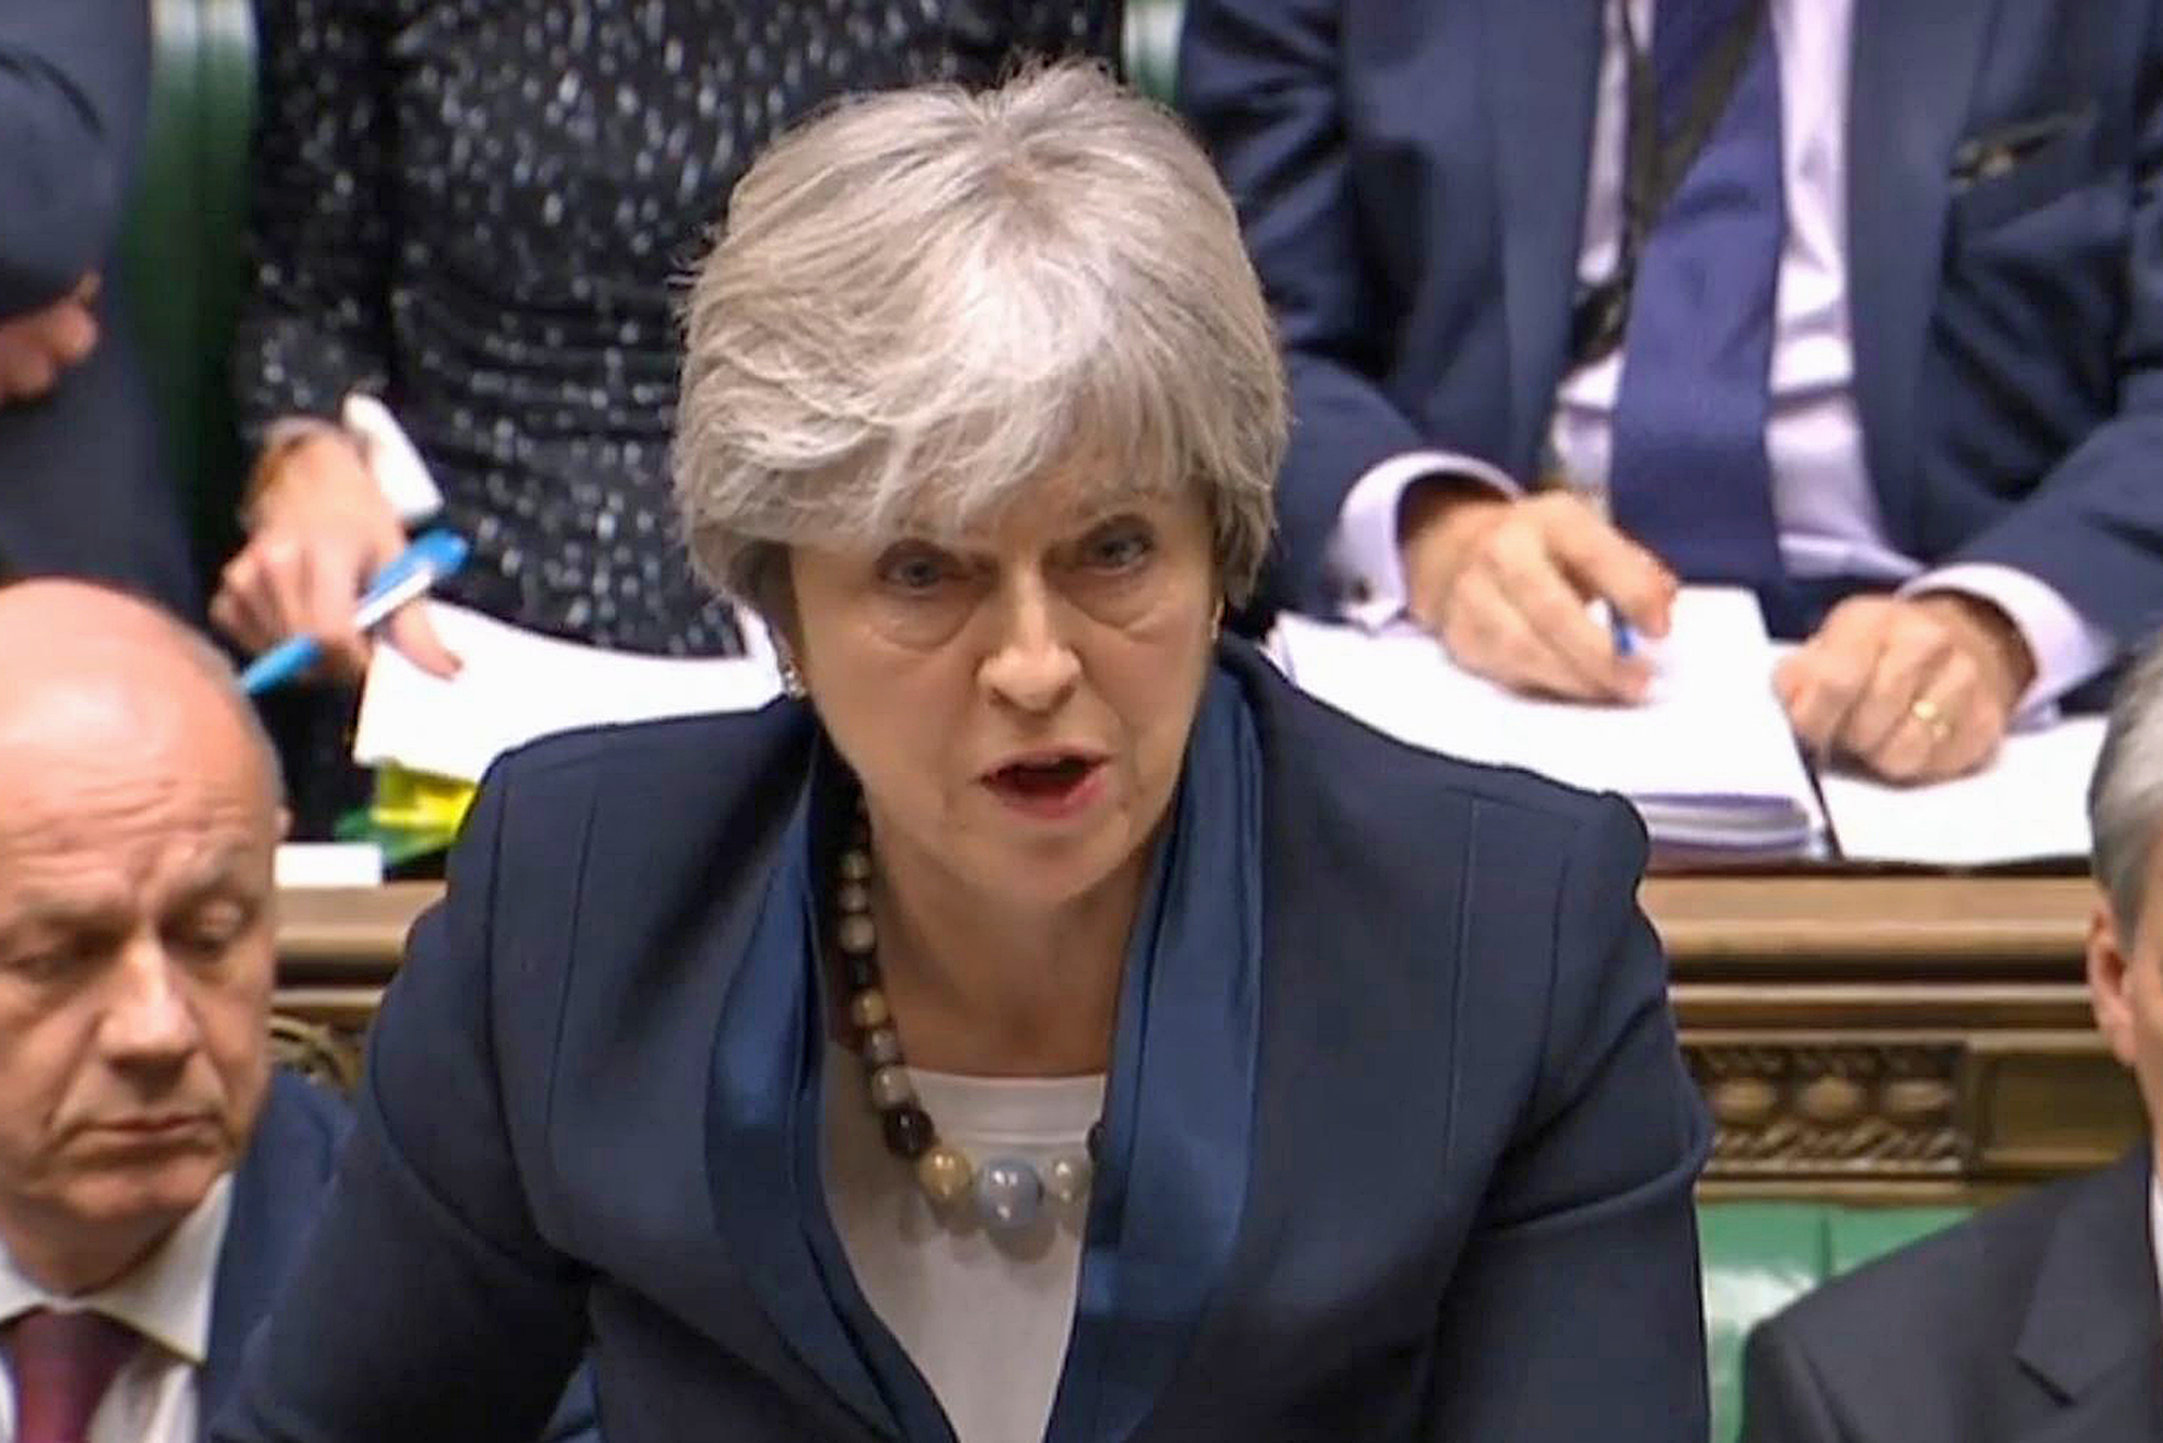 Theresa May says the government is committed to tackling rough sleeping